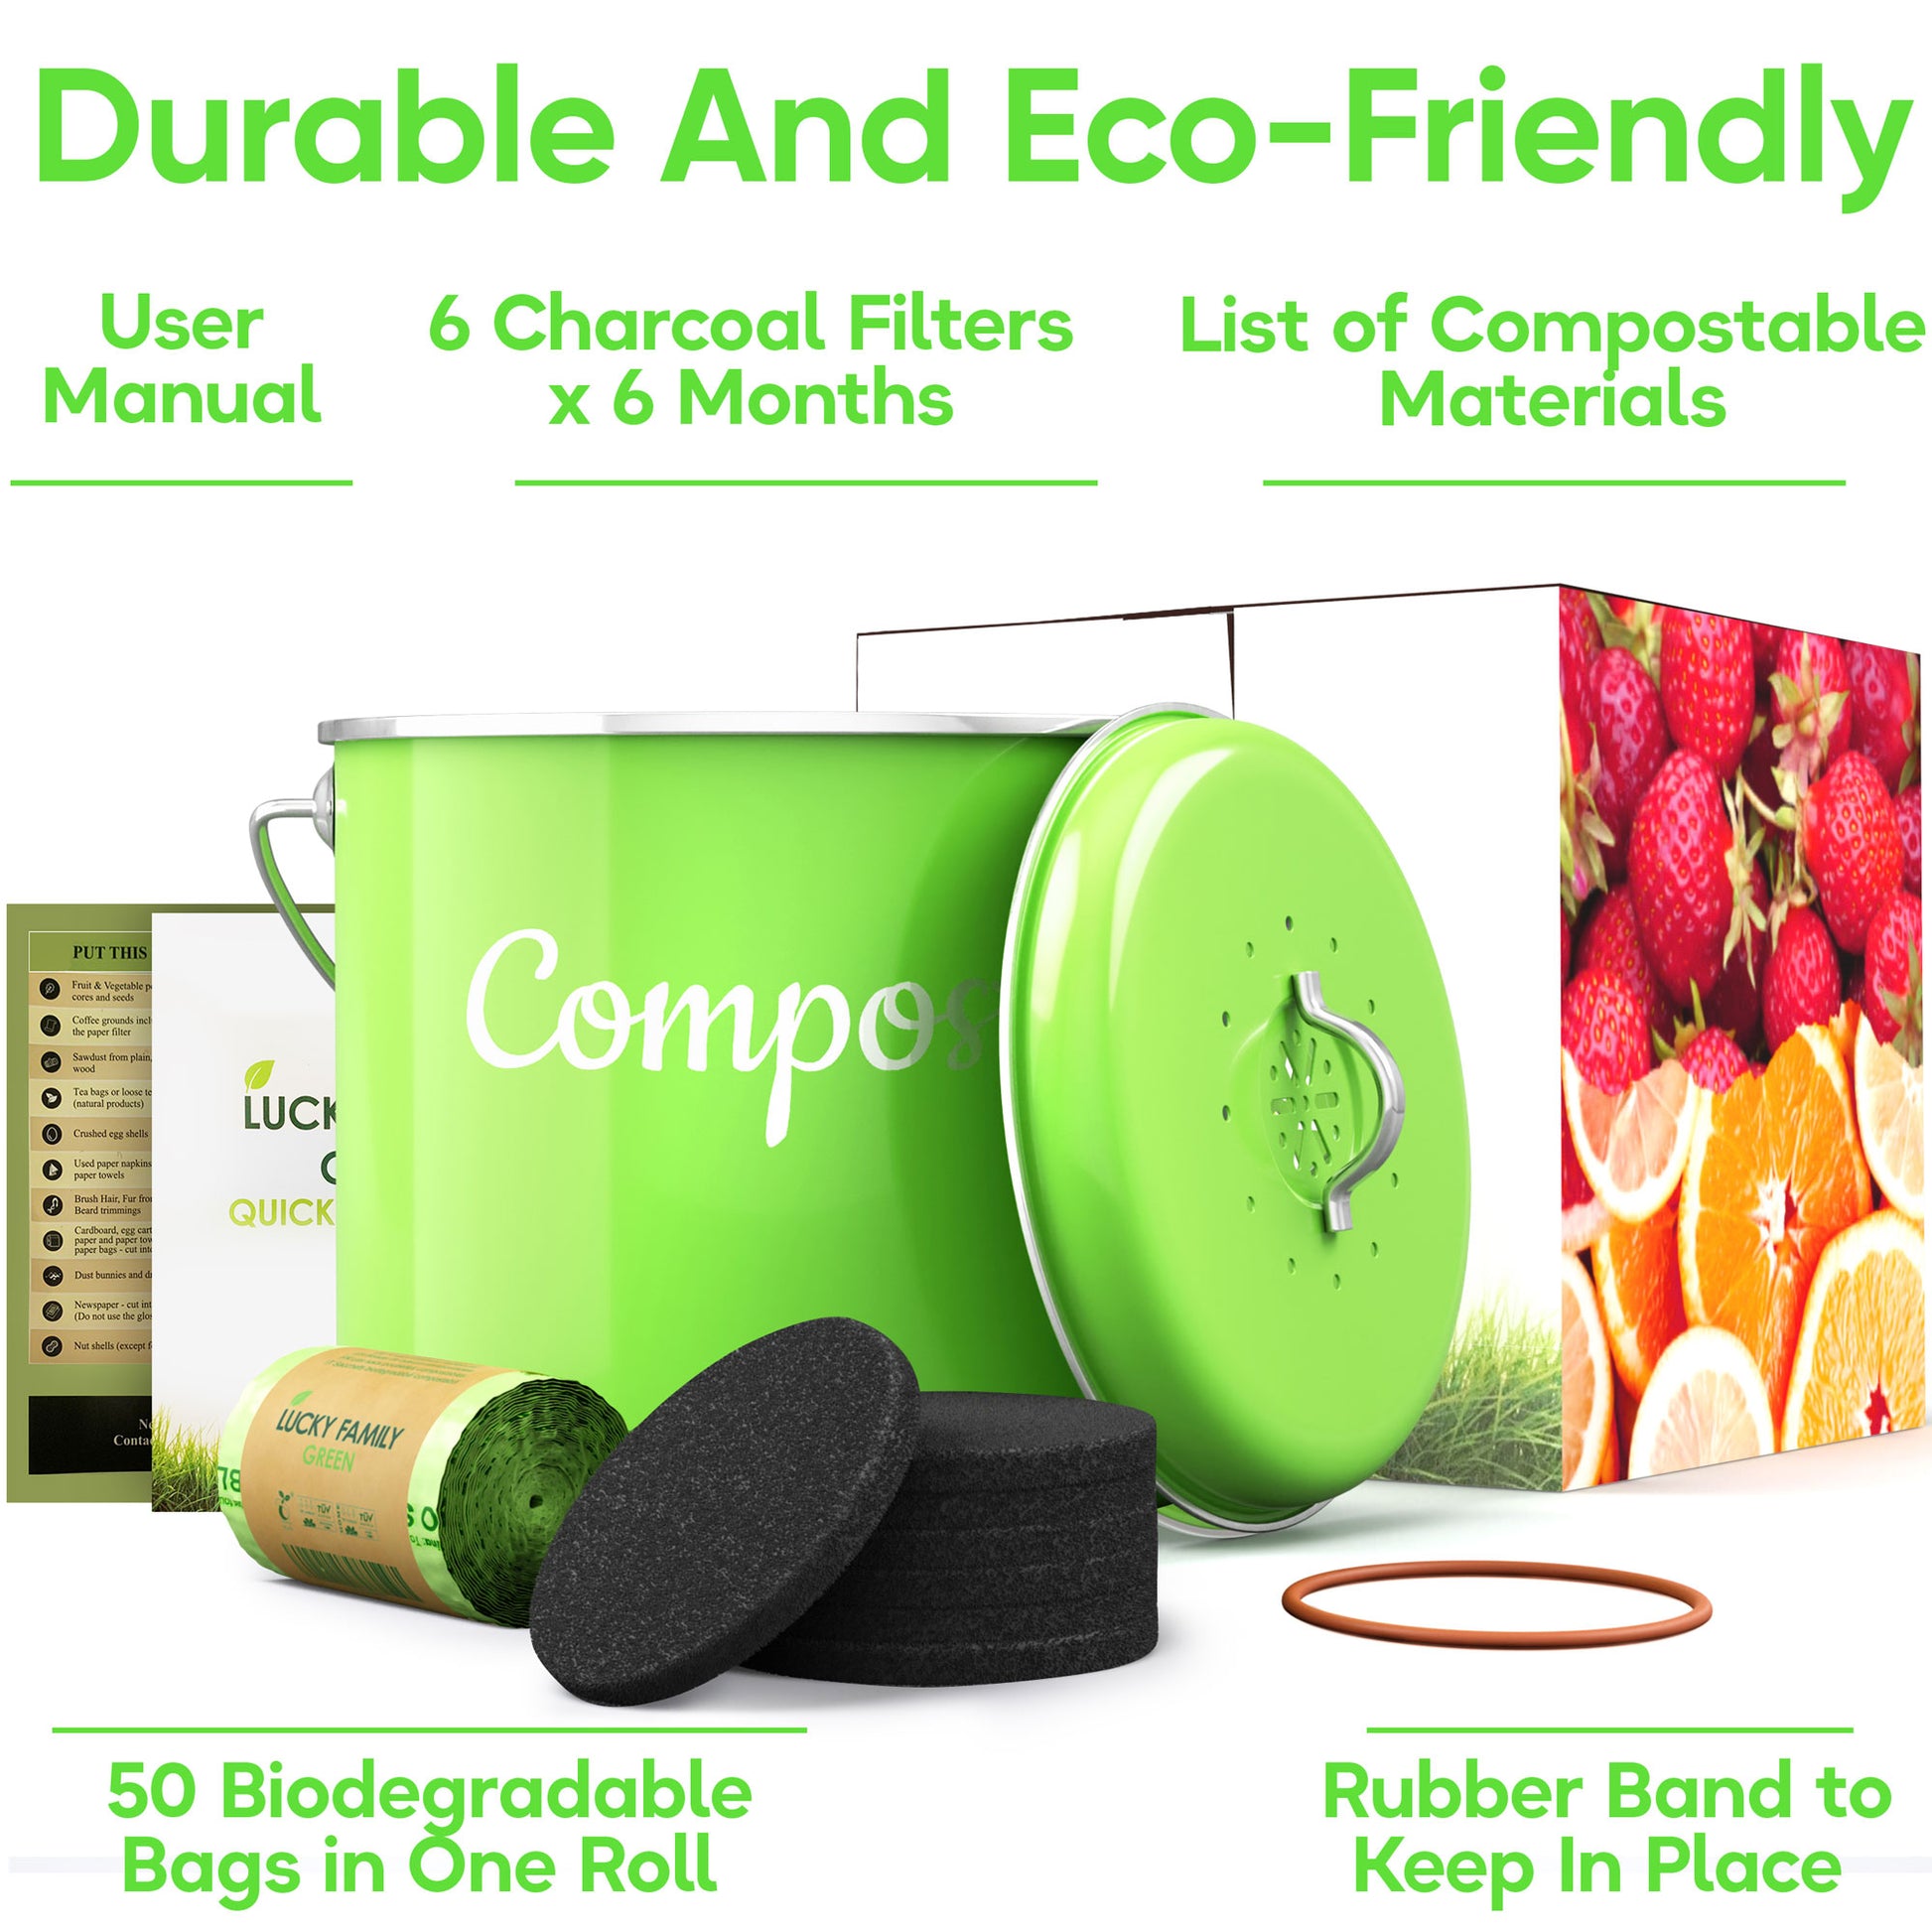 Lucky Family Green Countertop Compost Bin with Lid - 1.6 Gal